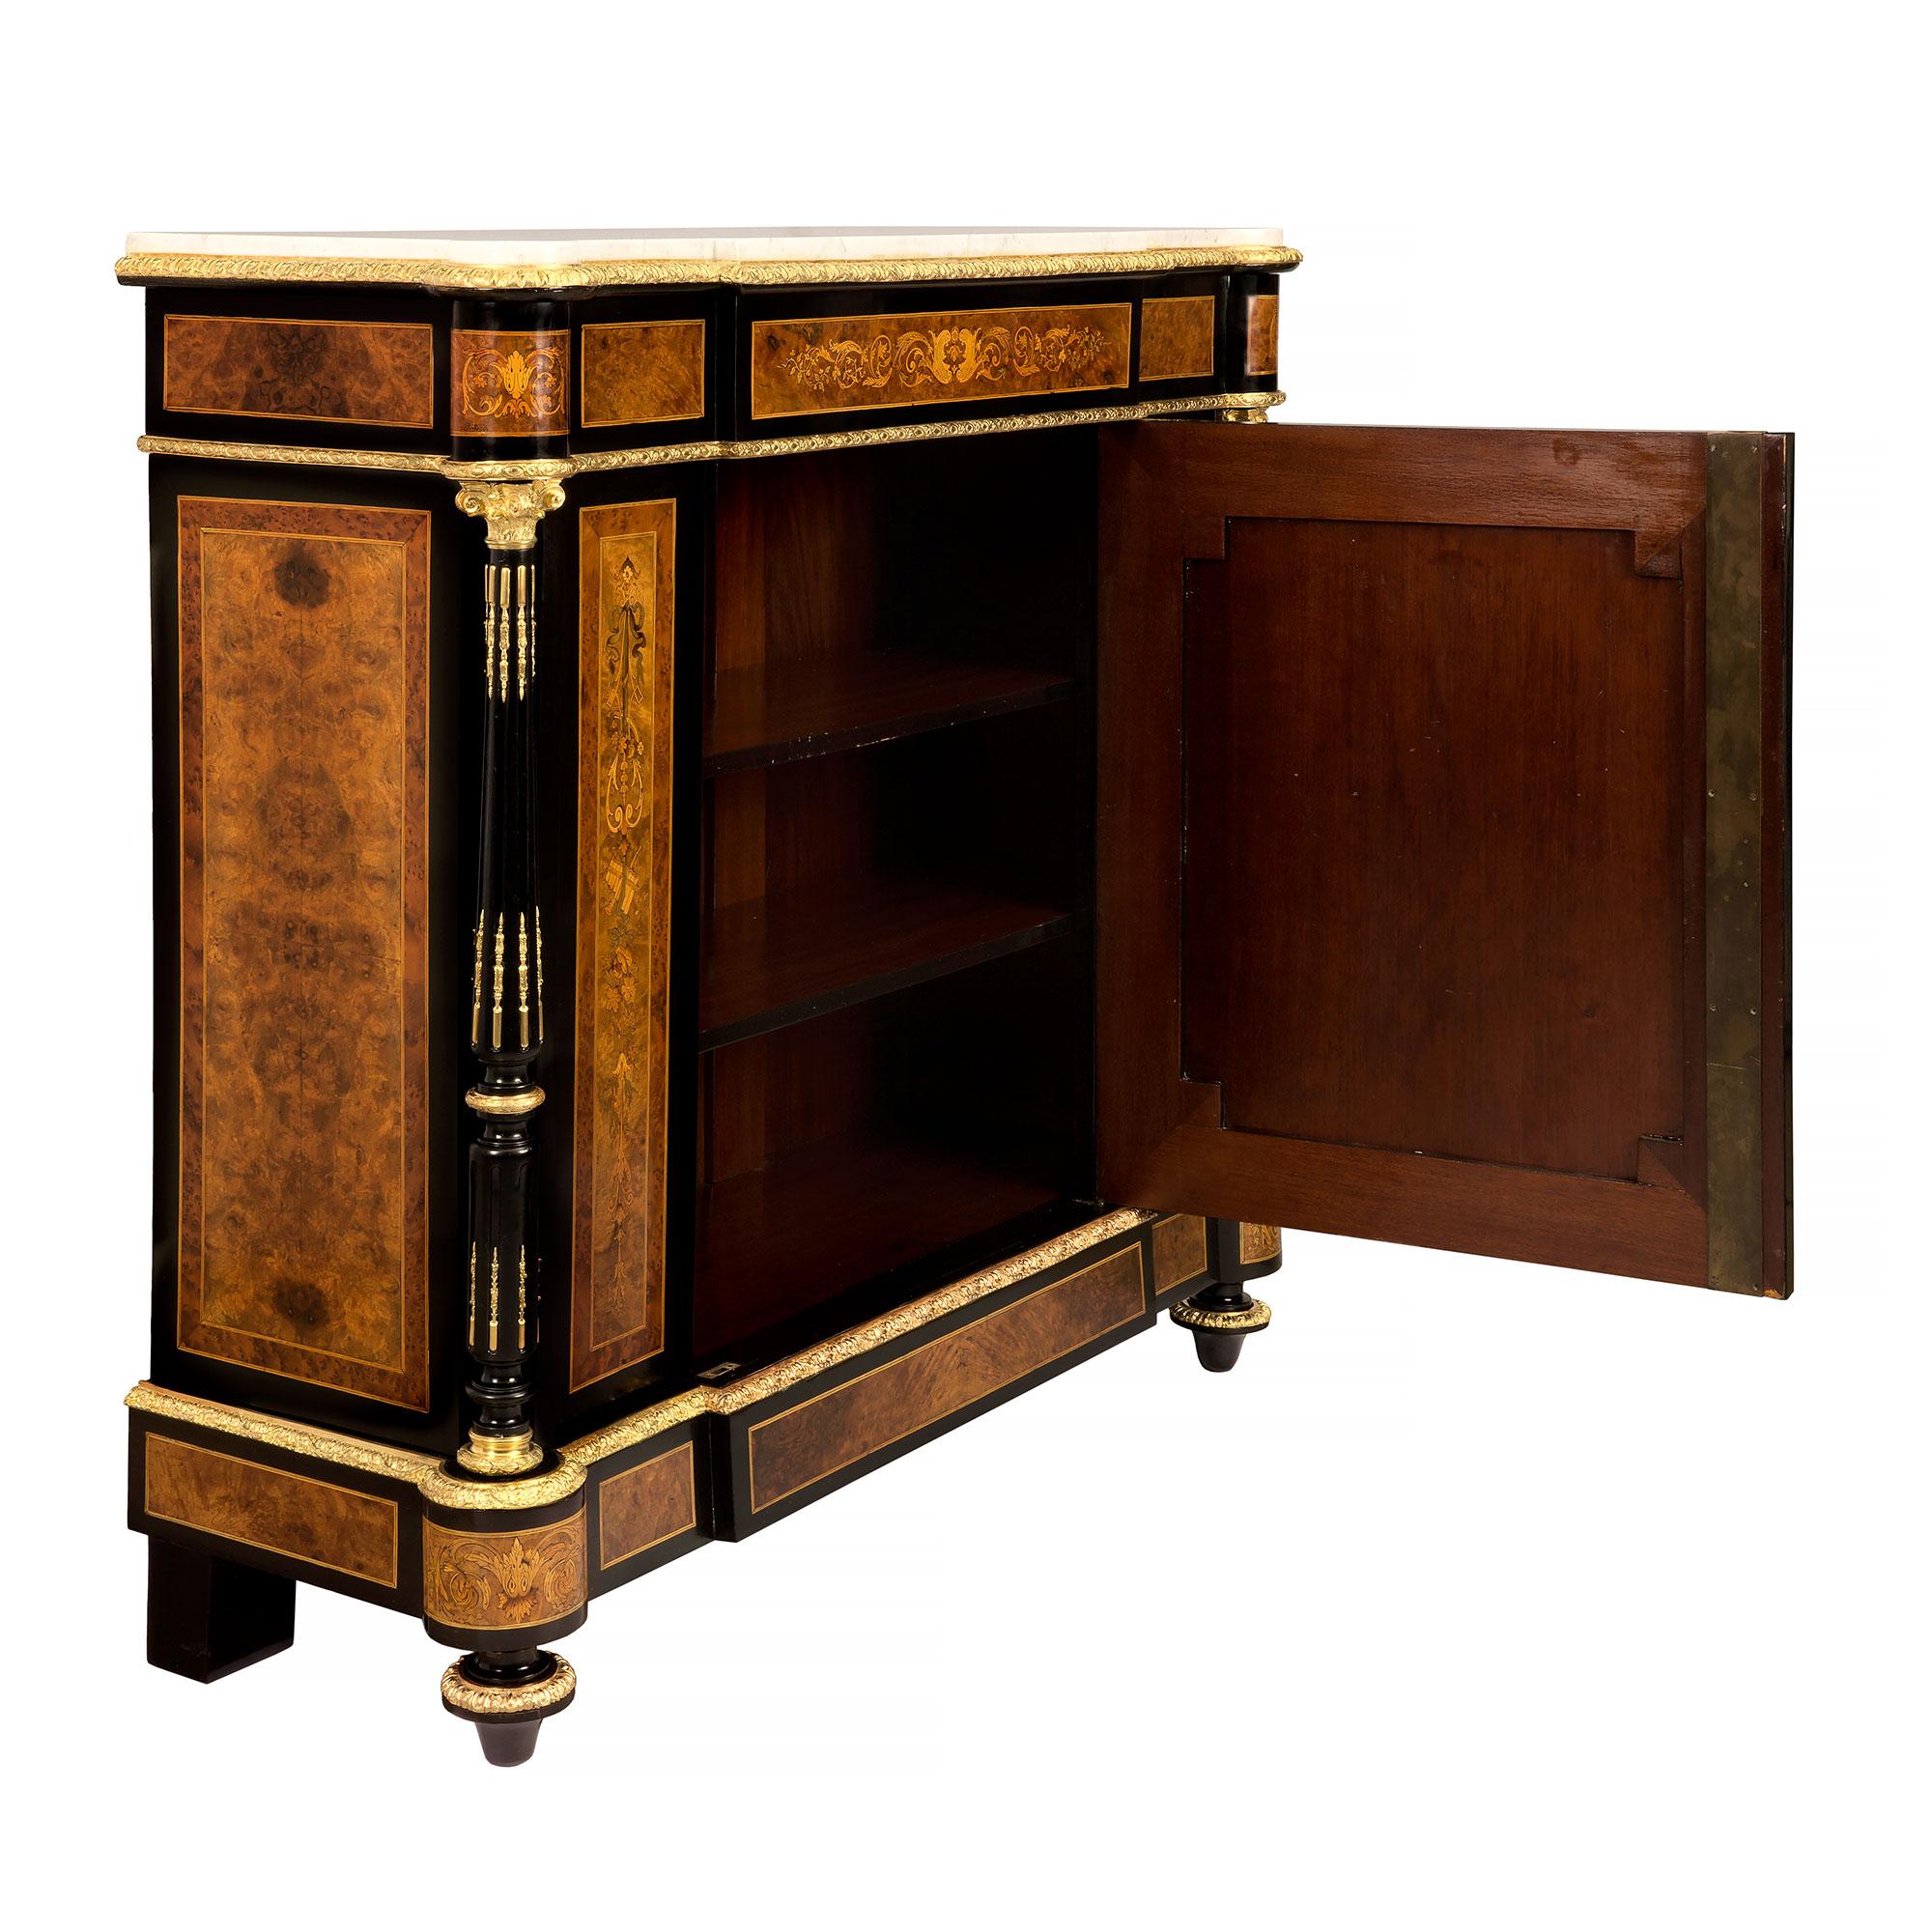 French 19th Century Napoleon III Period Exotic Wood, Ormolu and Marble Cabinet For Sale 1